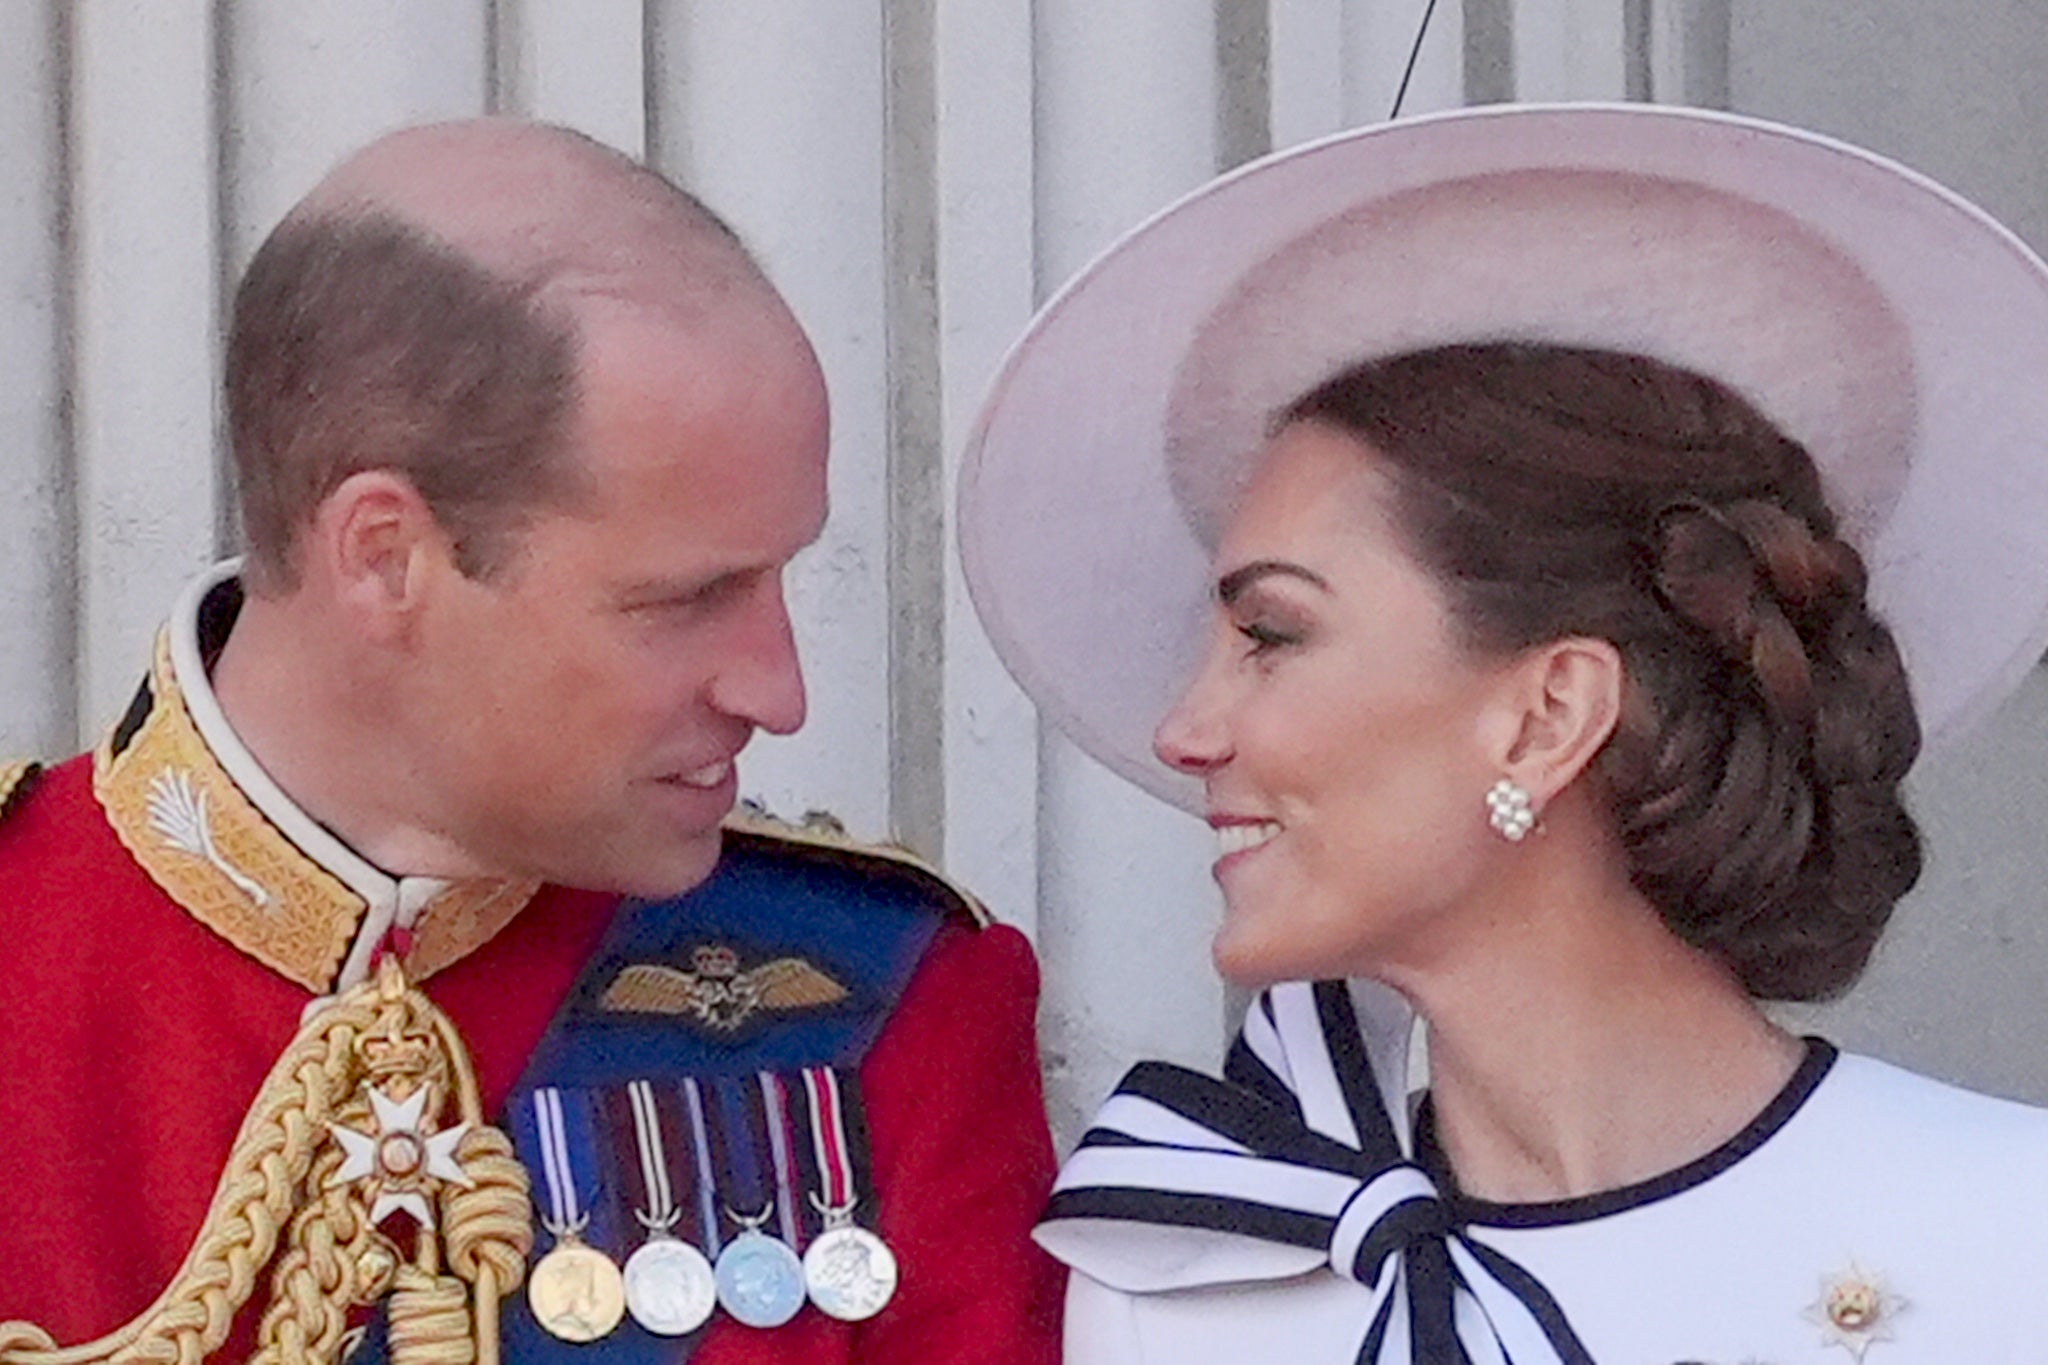 A royal photographer believes Kate and William are ‘a very strong’ unit after they shared a loving look at Trooping the Colour.